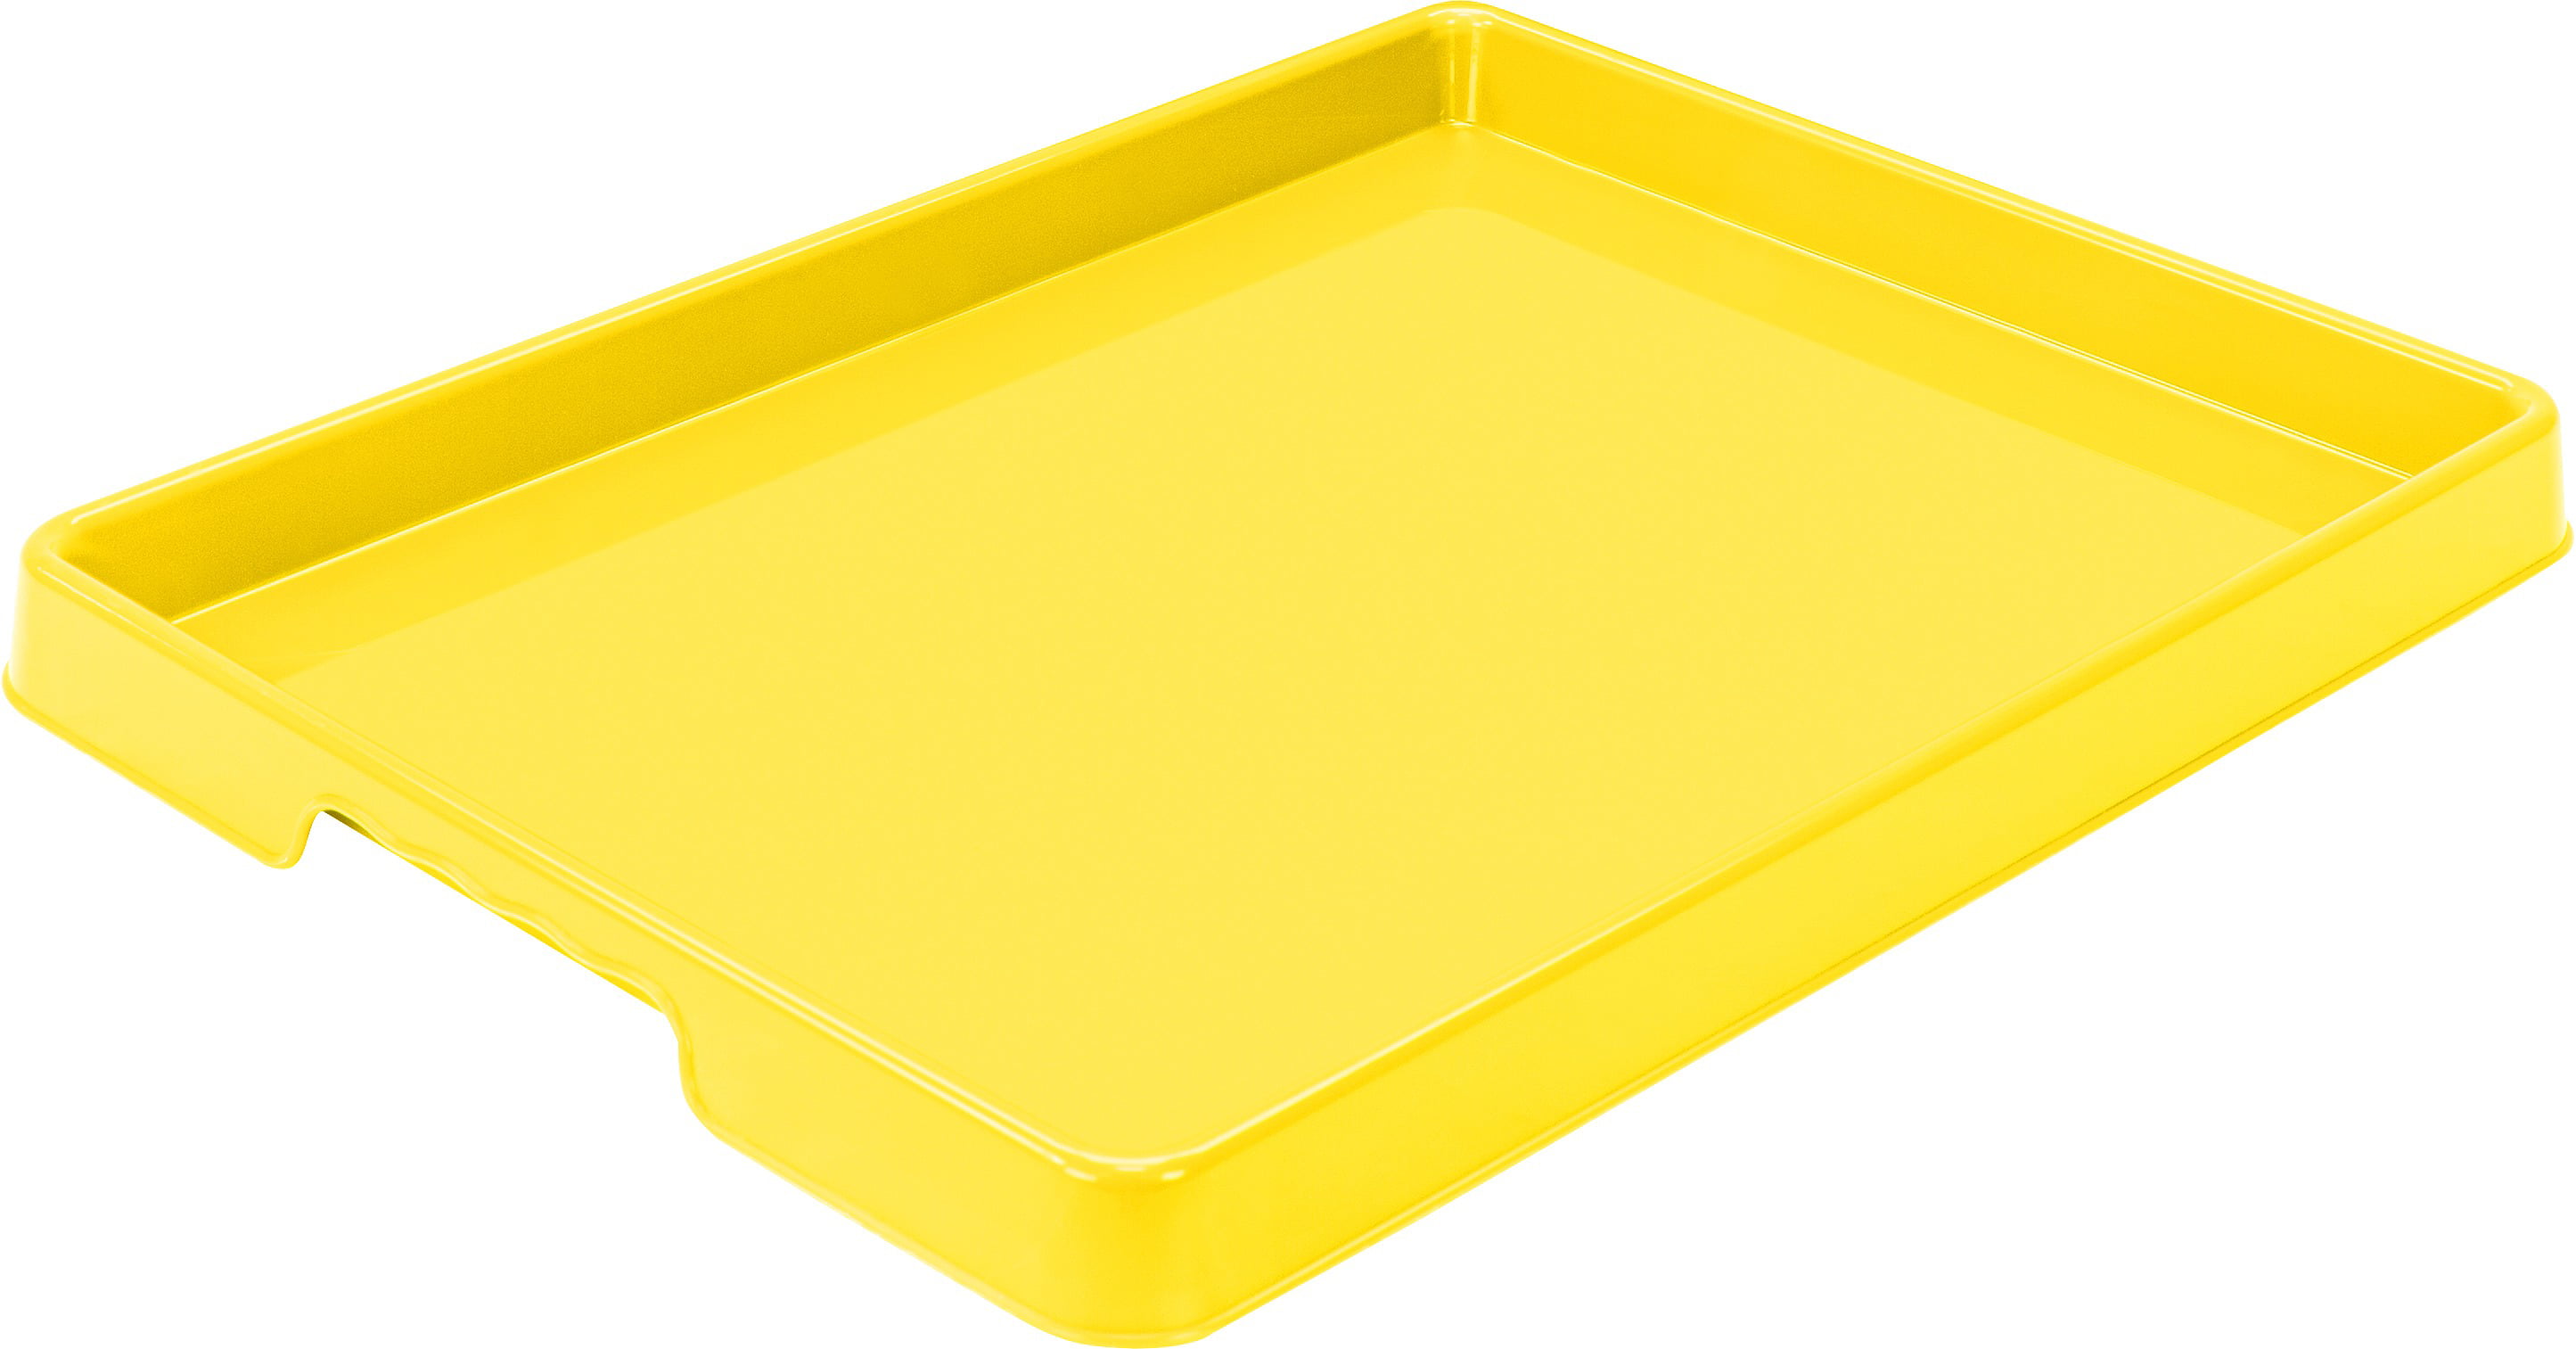 Storex Sorting and Crafts Tray, 12 x 16 Inches, Assorted Colors, Set of 12